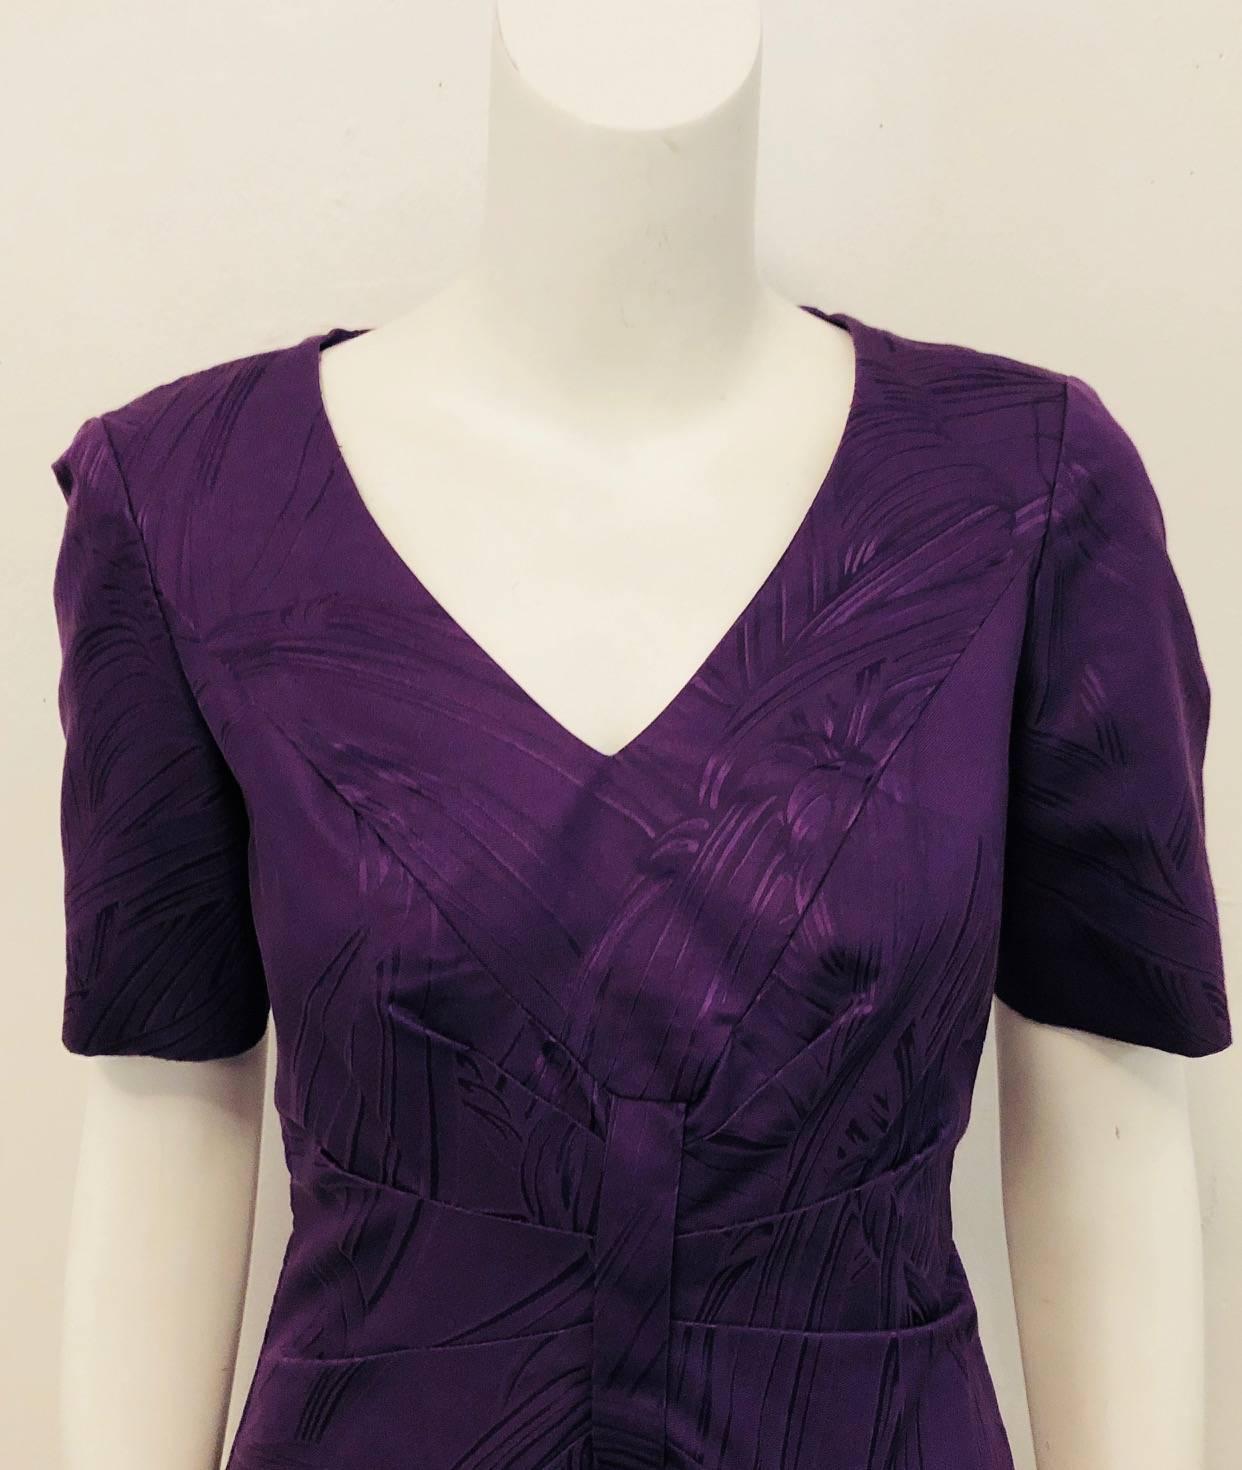 This Carolina Herrera purple brocade sheath dress is an exquisite dress for many occasions,  you could say a dress for all seasons!   With its V neckline, short sleeves and gathered bodice, this dress follows the House of Herrera distinctive